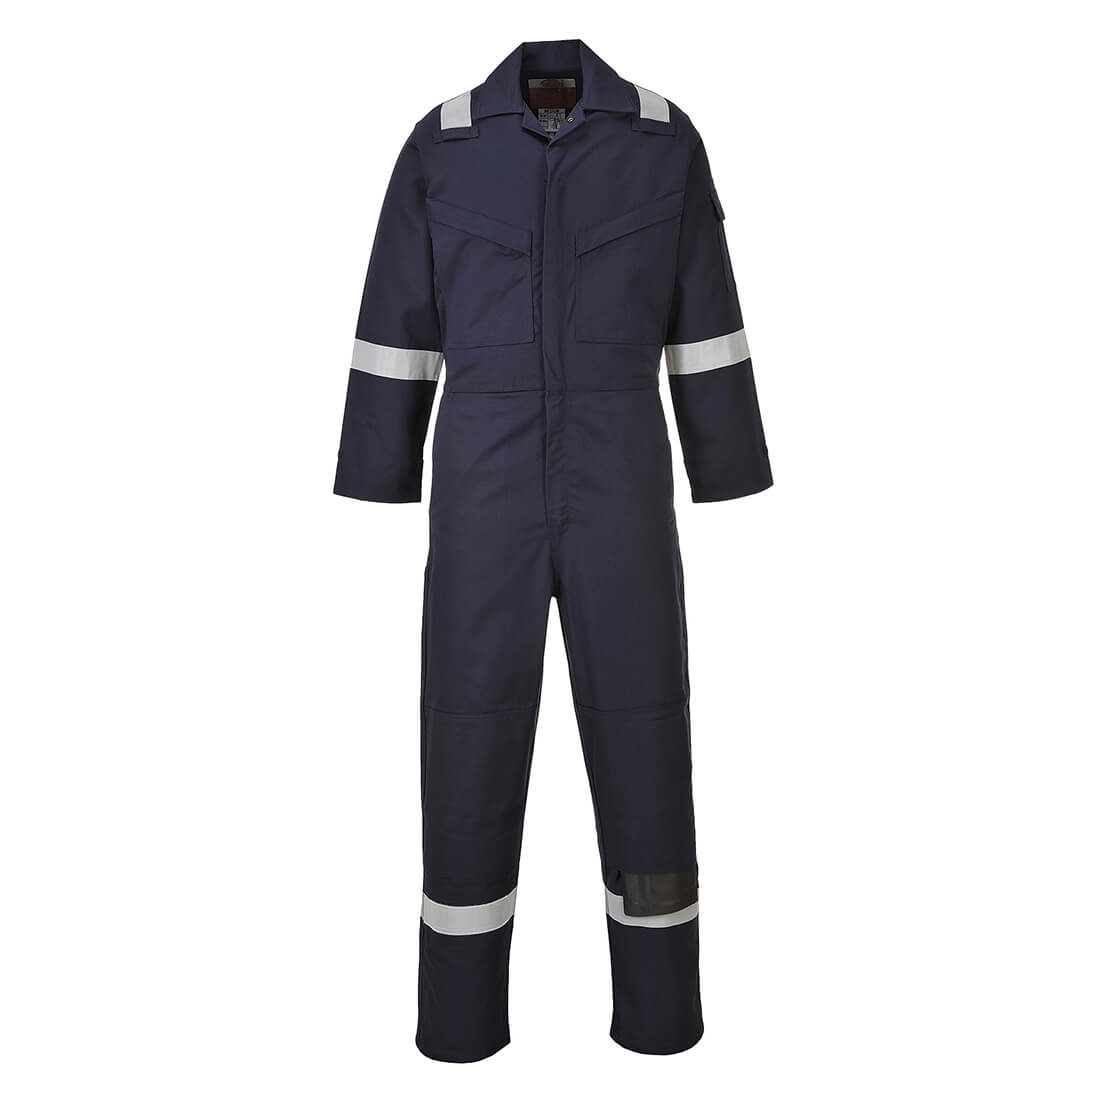 Image of Biz Flame Mens Aberdeen Flame Resistant Antistatic Coverall Navy Blue XS 32"